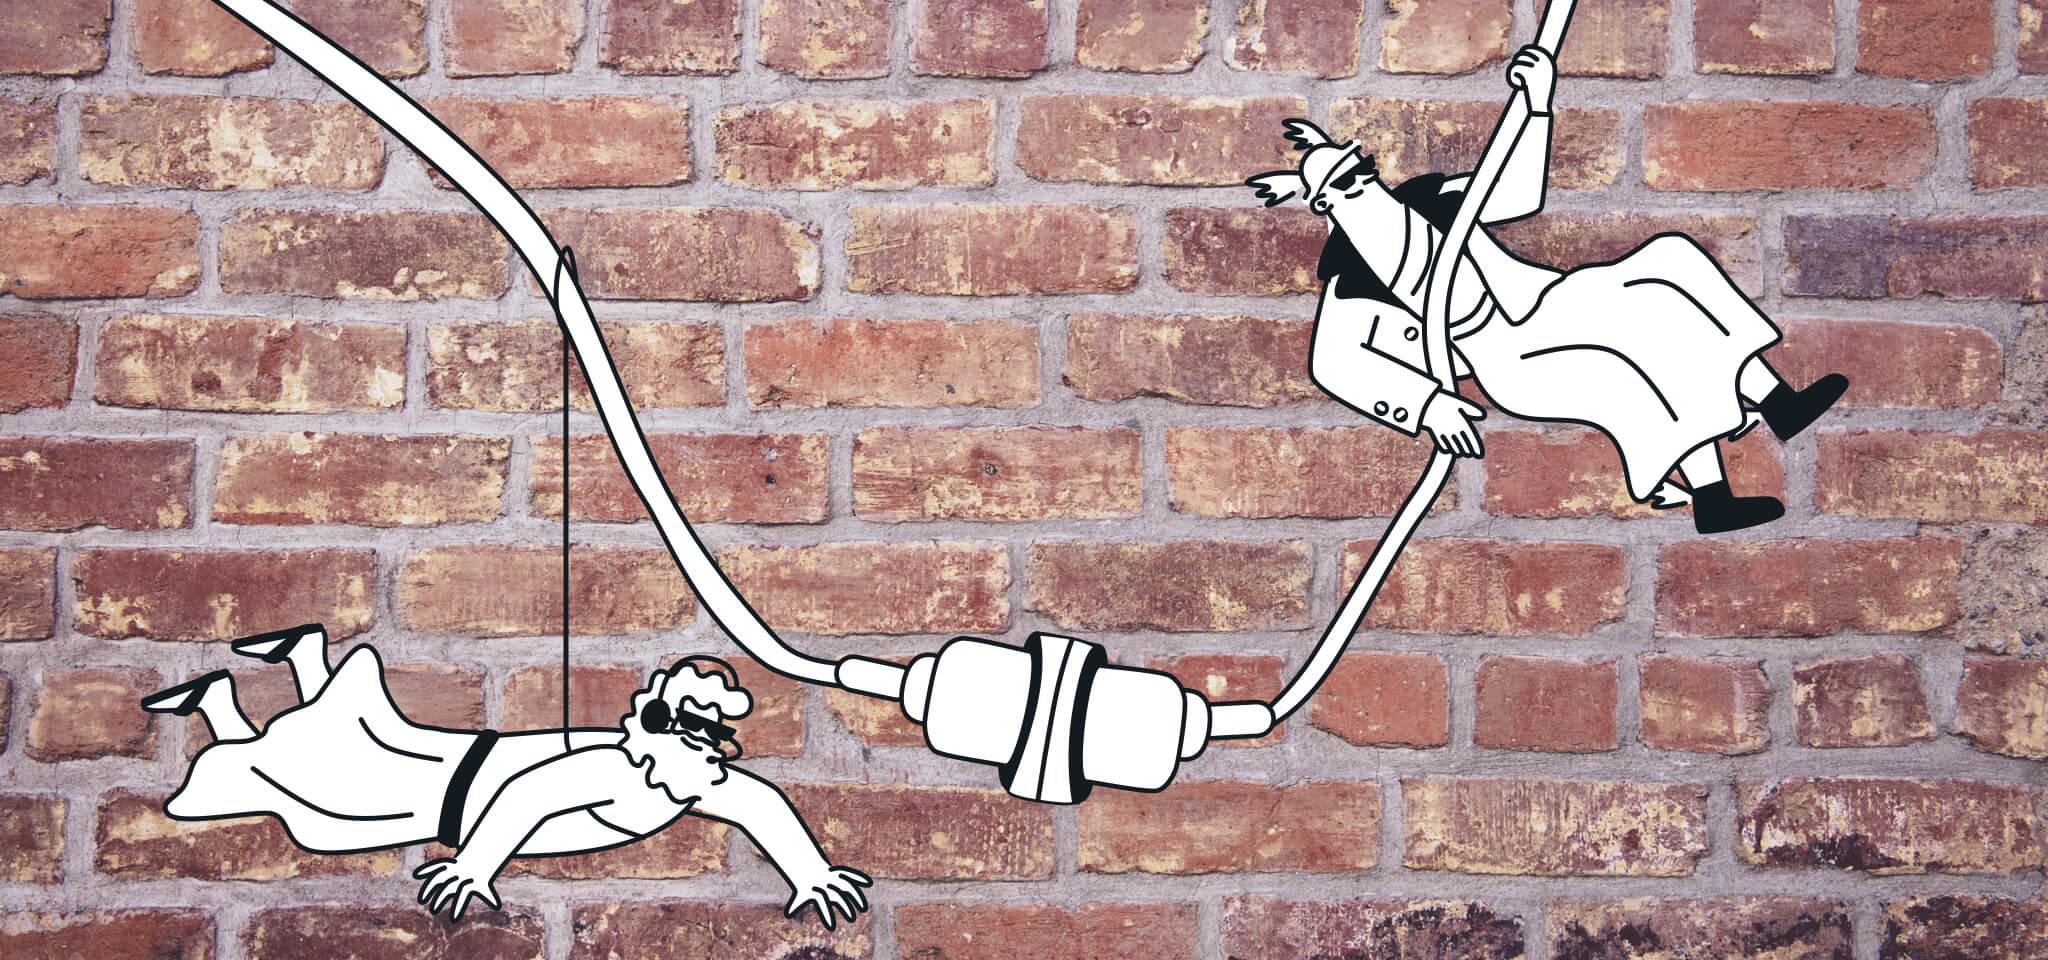 Hermes and a God hang from a cable in front of a brick wall